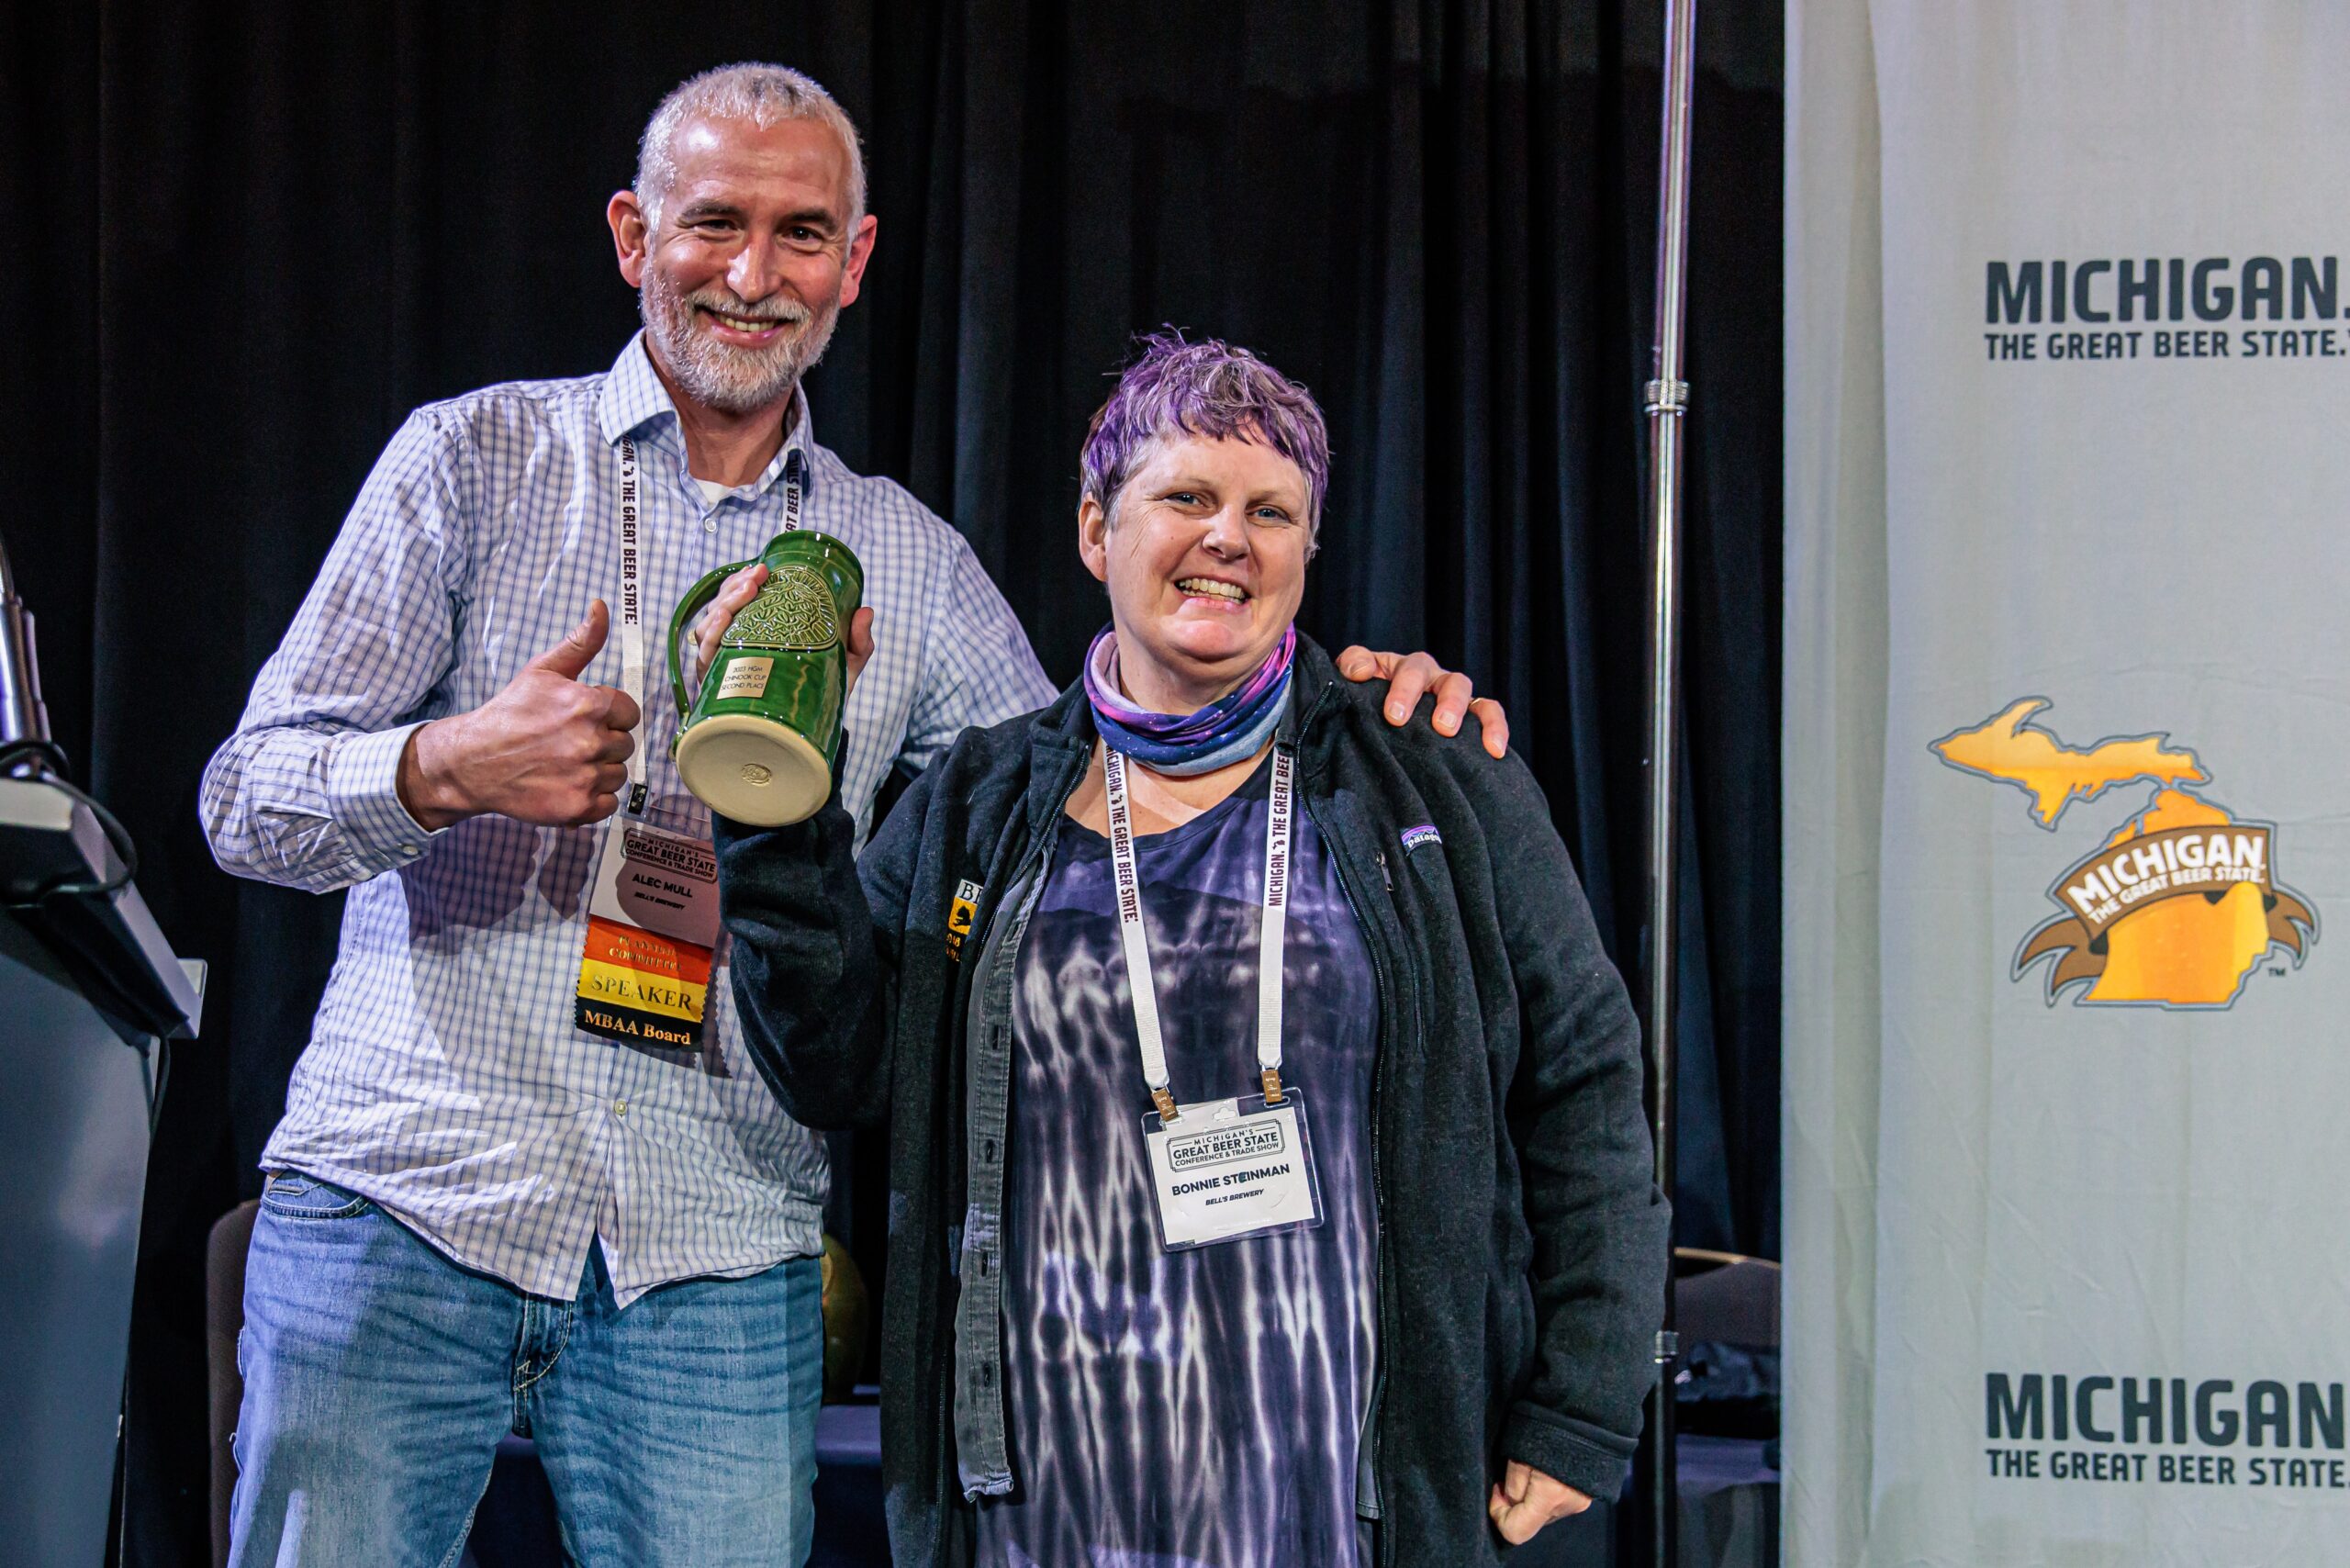 Bonnie and Alec stand smiling in front of a banner that reads "MICHIGAN THE GREAT BEER STATE." Alec is on the left, with gray hair and a beard, is holding a green beer stein trophy and giving a thumbs-up. The person on the right,Bonnie, with short purple hair, is wearing a black jacket.